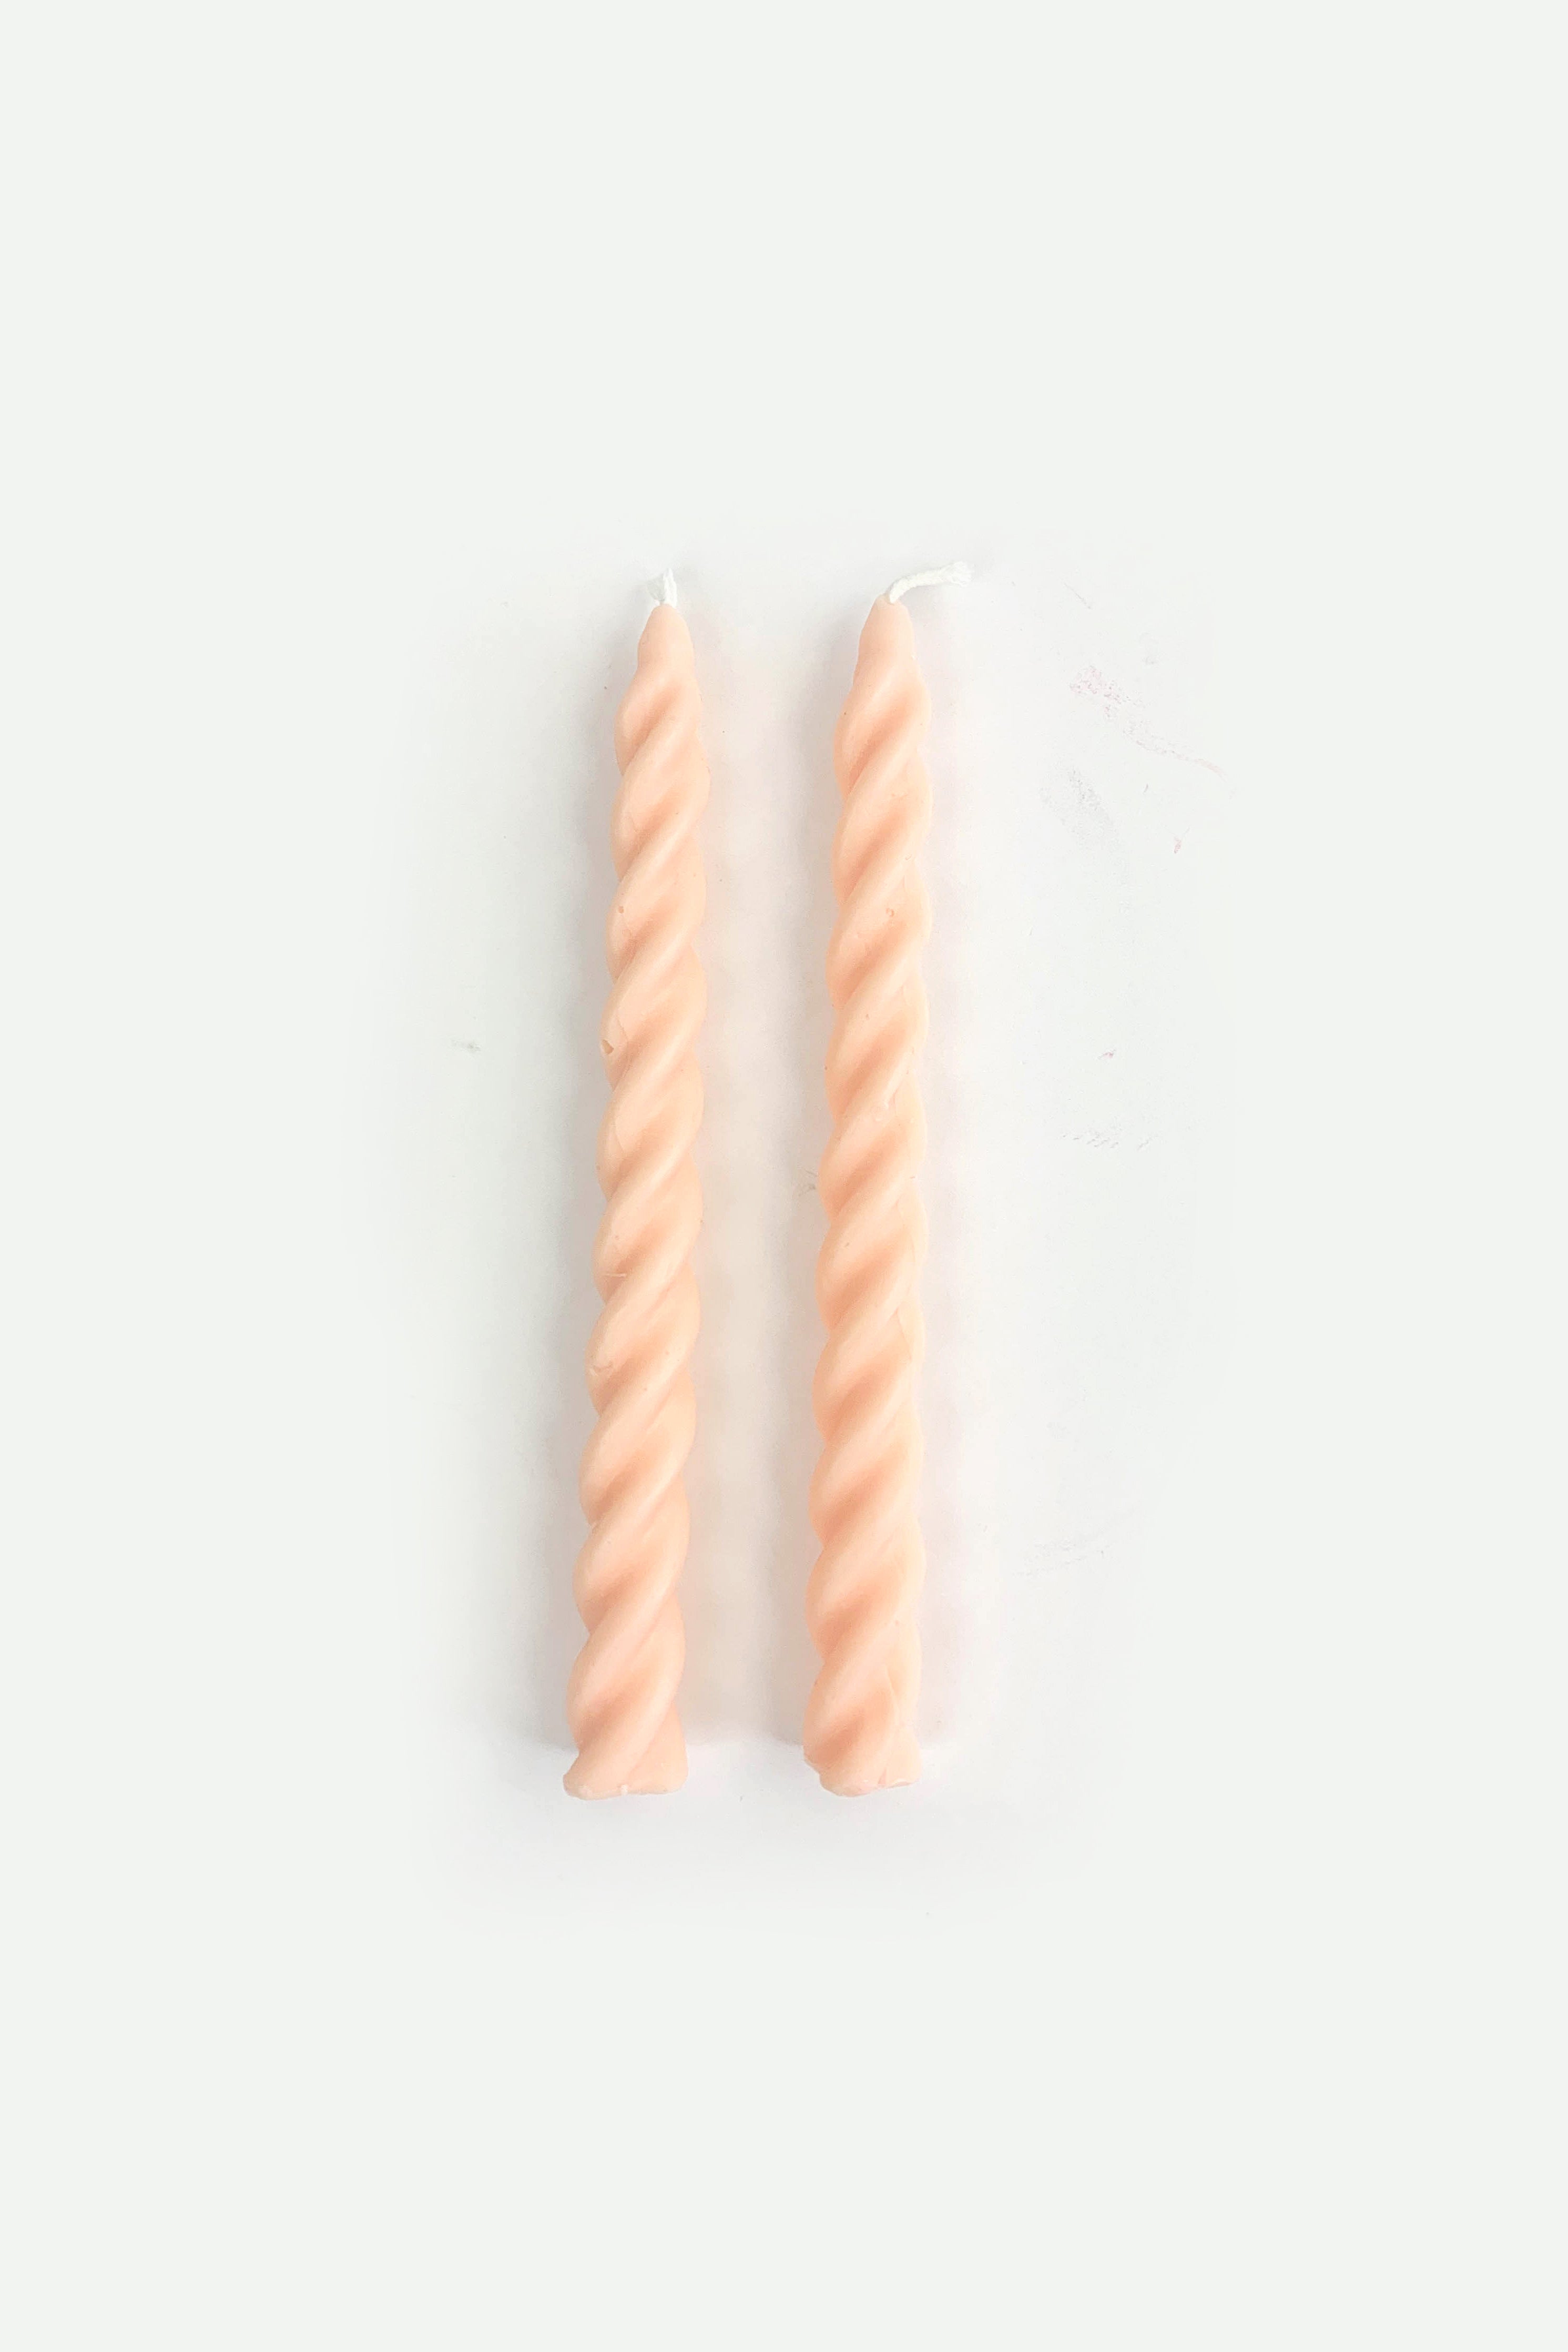 Twisted Taper Candle in Peach